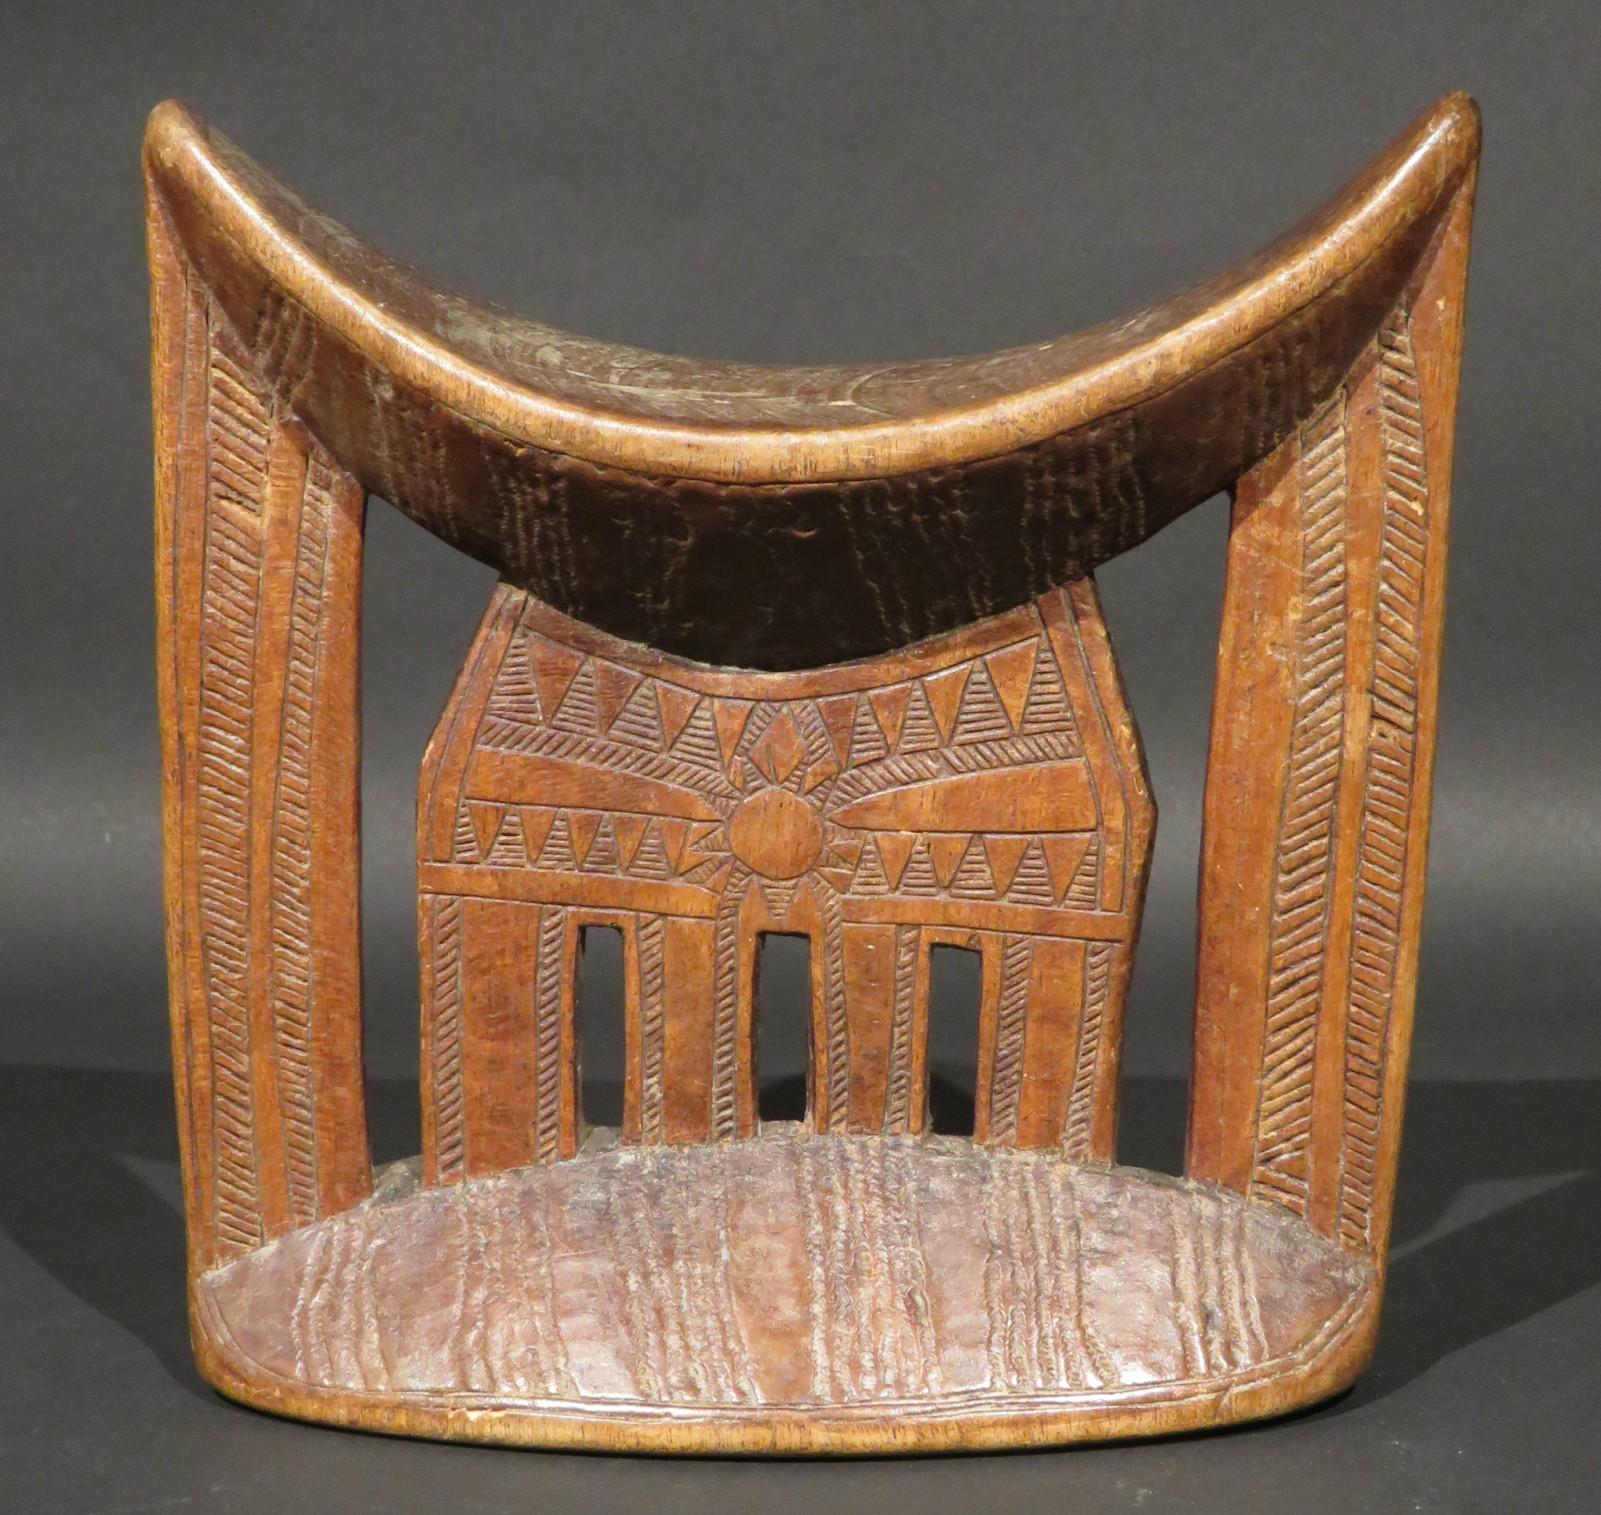 Showing a crescent shaped rest braced by flattened supports atop a cupped base, decorated with carved incised geometric motifs and exhibiting a mellow patina overall.